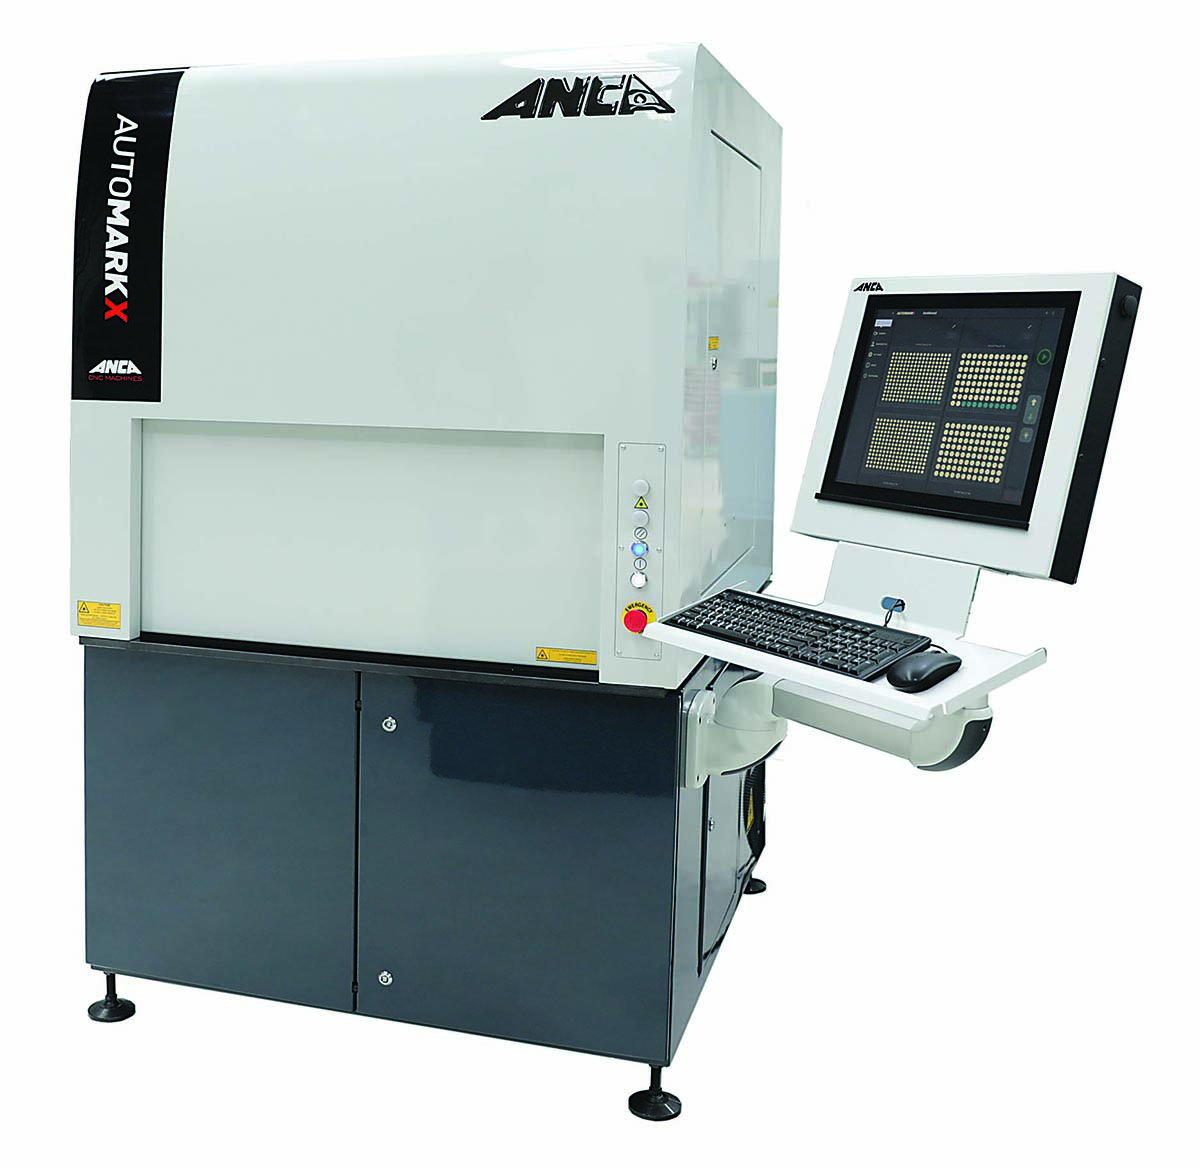 A stand-alone laser marking station, the AutoMarkX can work in a fully automatic mode.